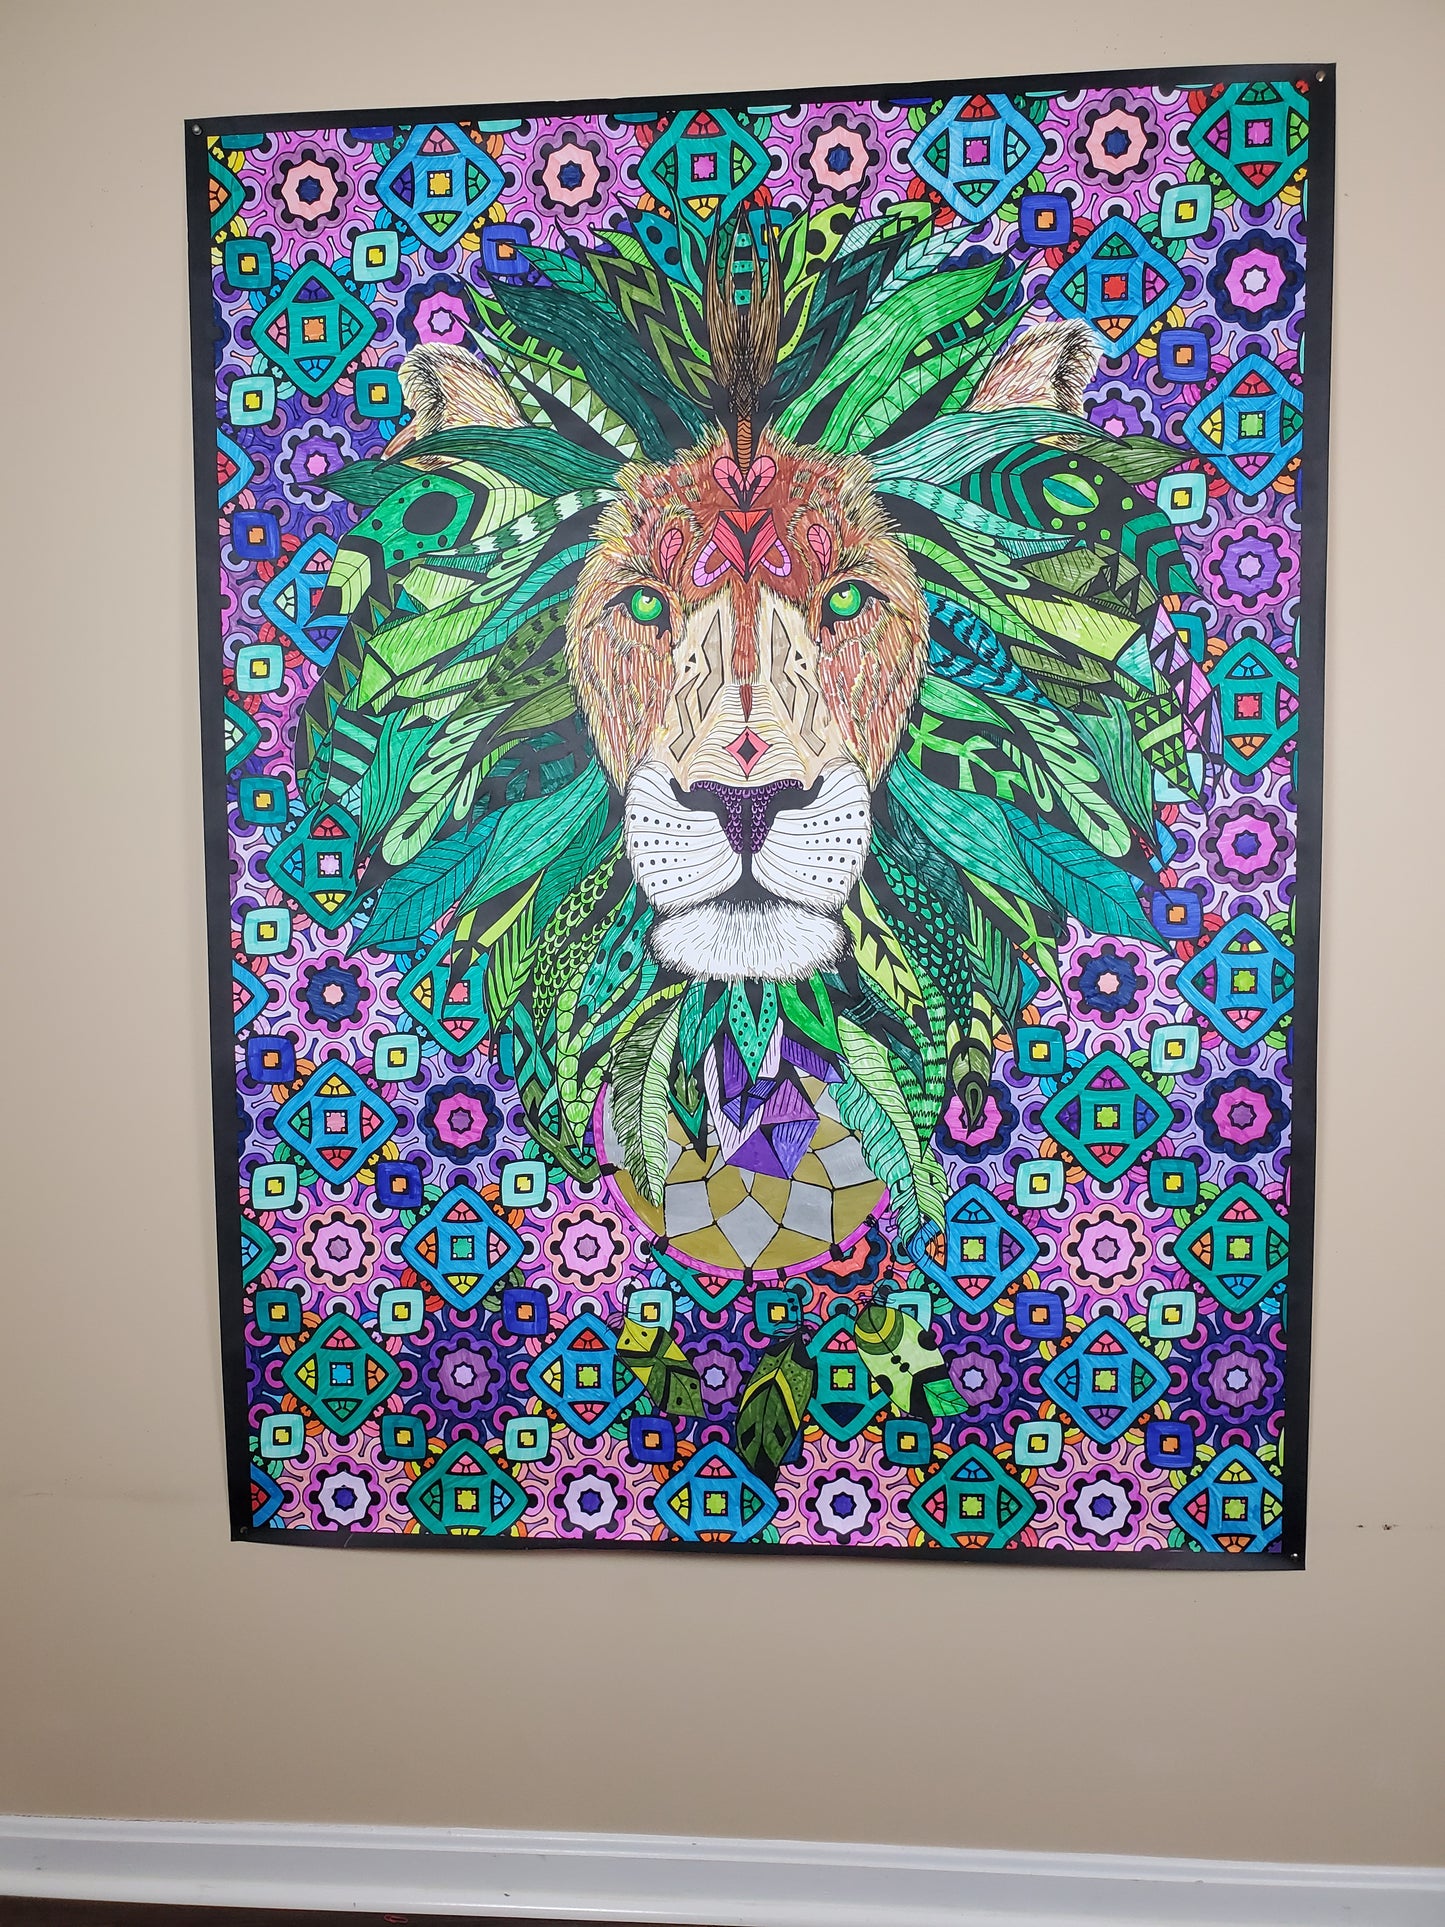 Lion Personalized Giant Coloring Poster 46"x60"